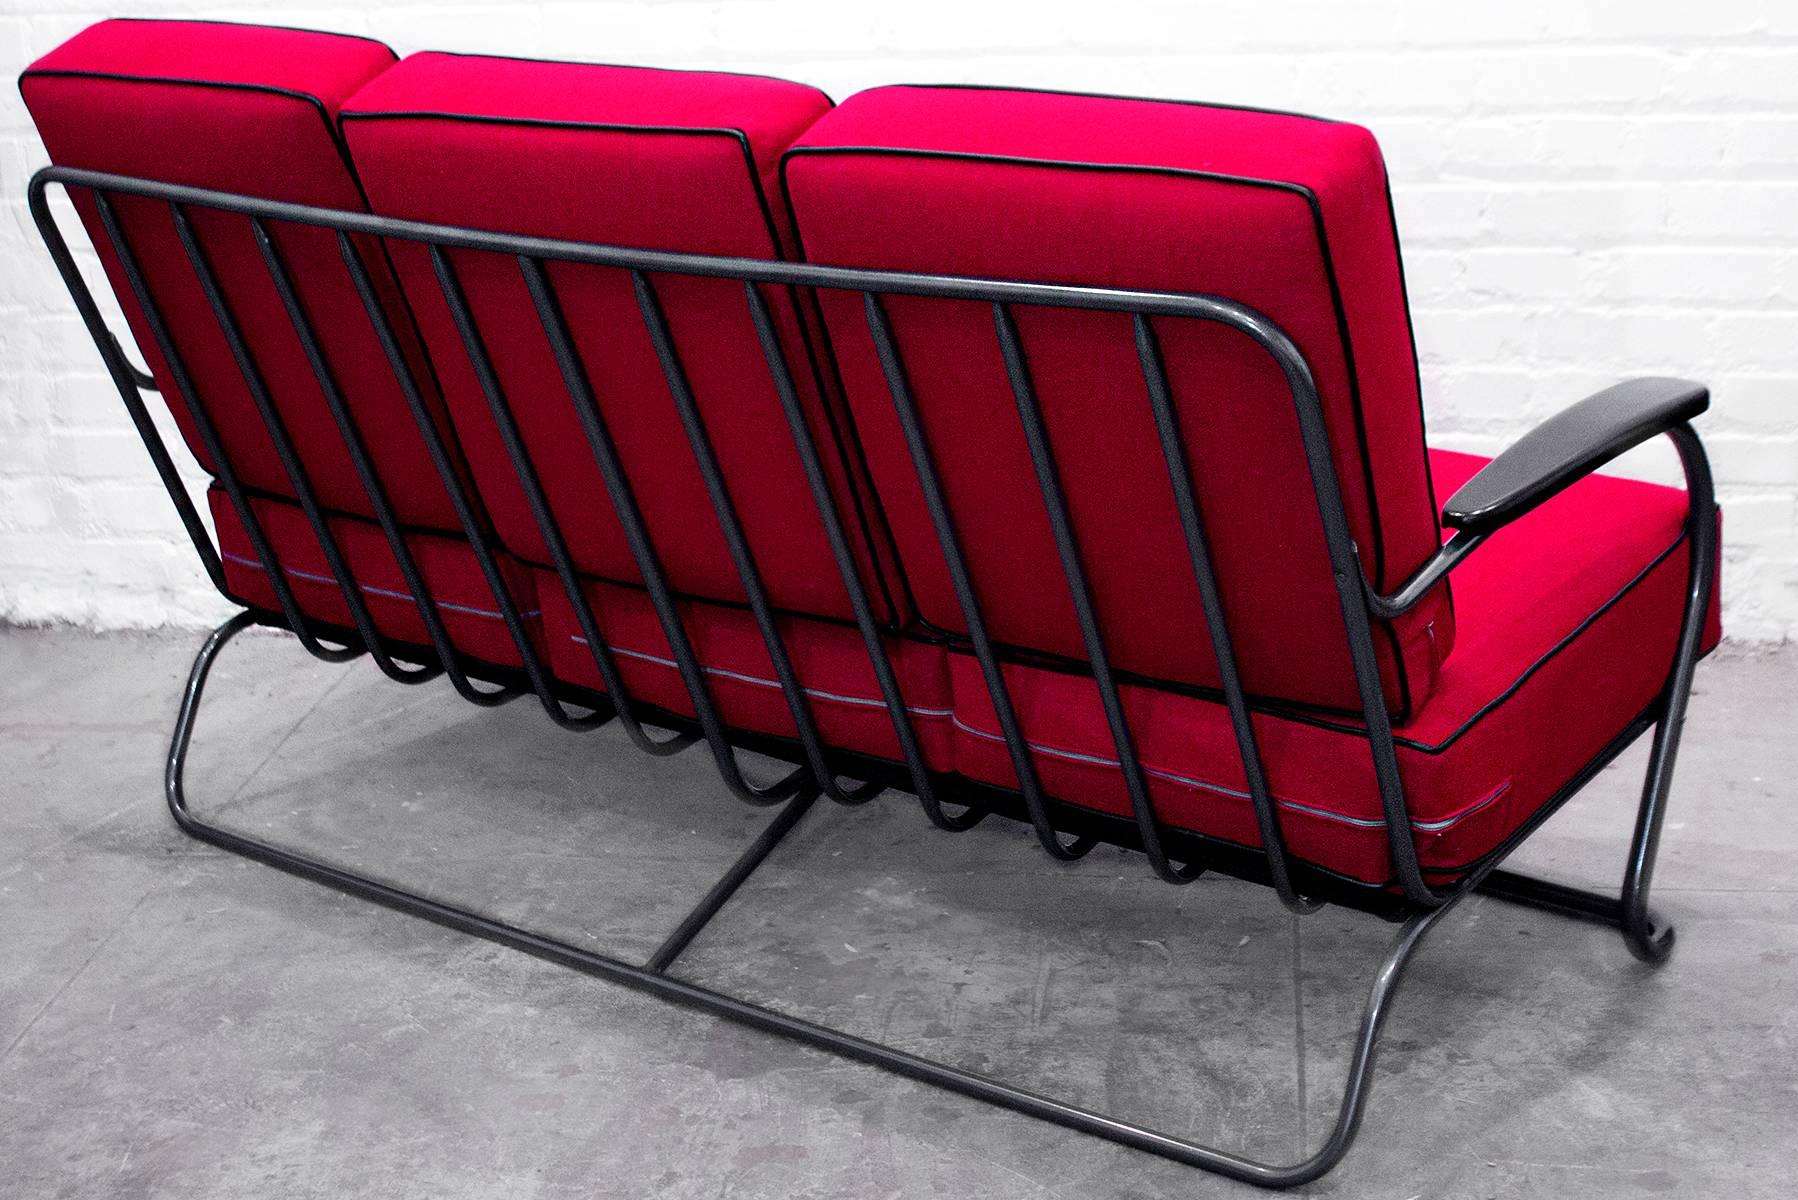 KEM Weber Classic sofa. Original chrome tube frame has been newly powder coated in a dark gray metallic. Reupholstered in crimson red micro-linen. Black Lacquer armrests. One of a kind version of this Classic.

Measures: 65" L x 35" D x